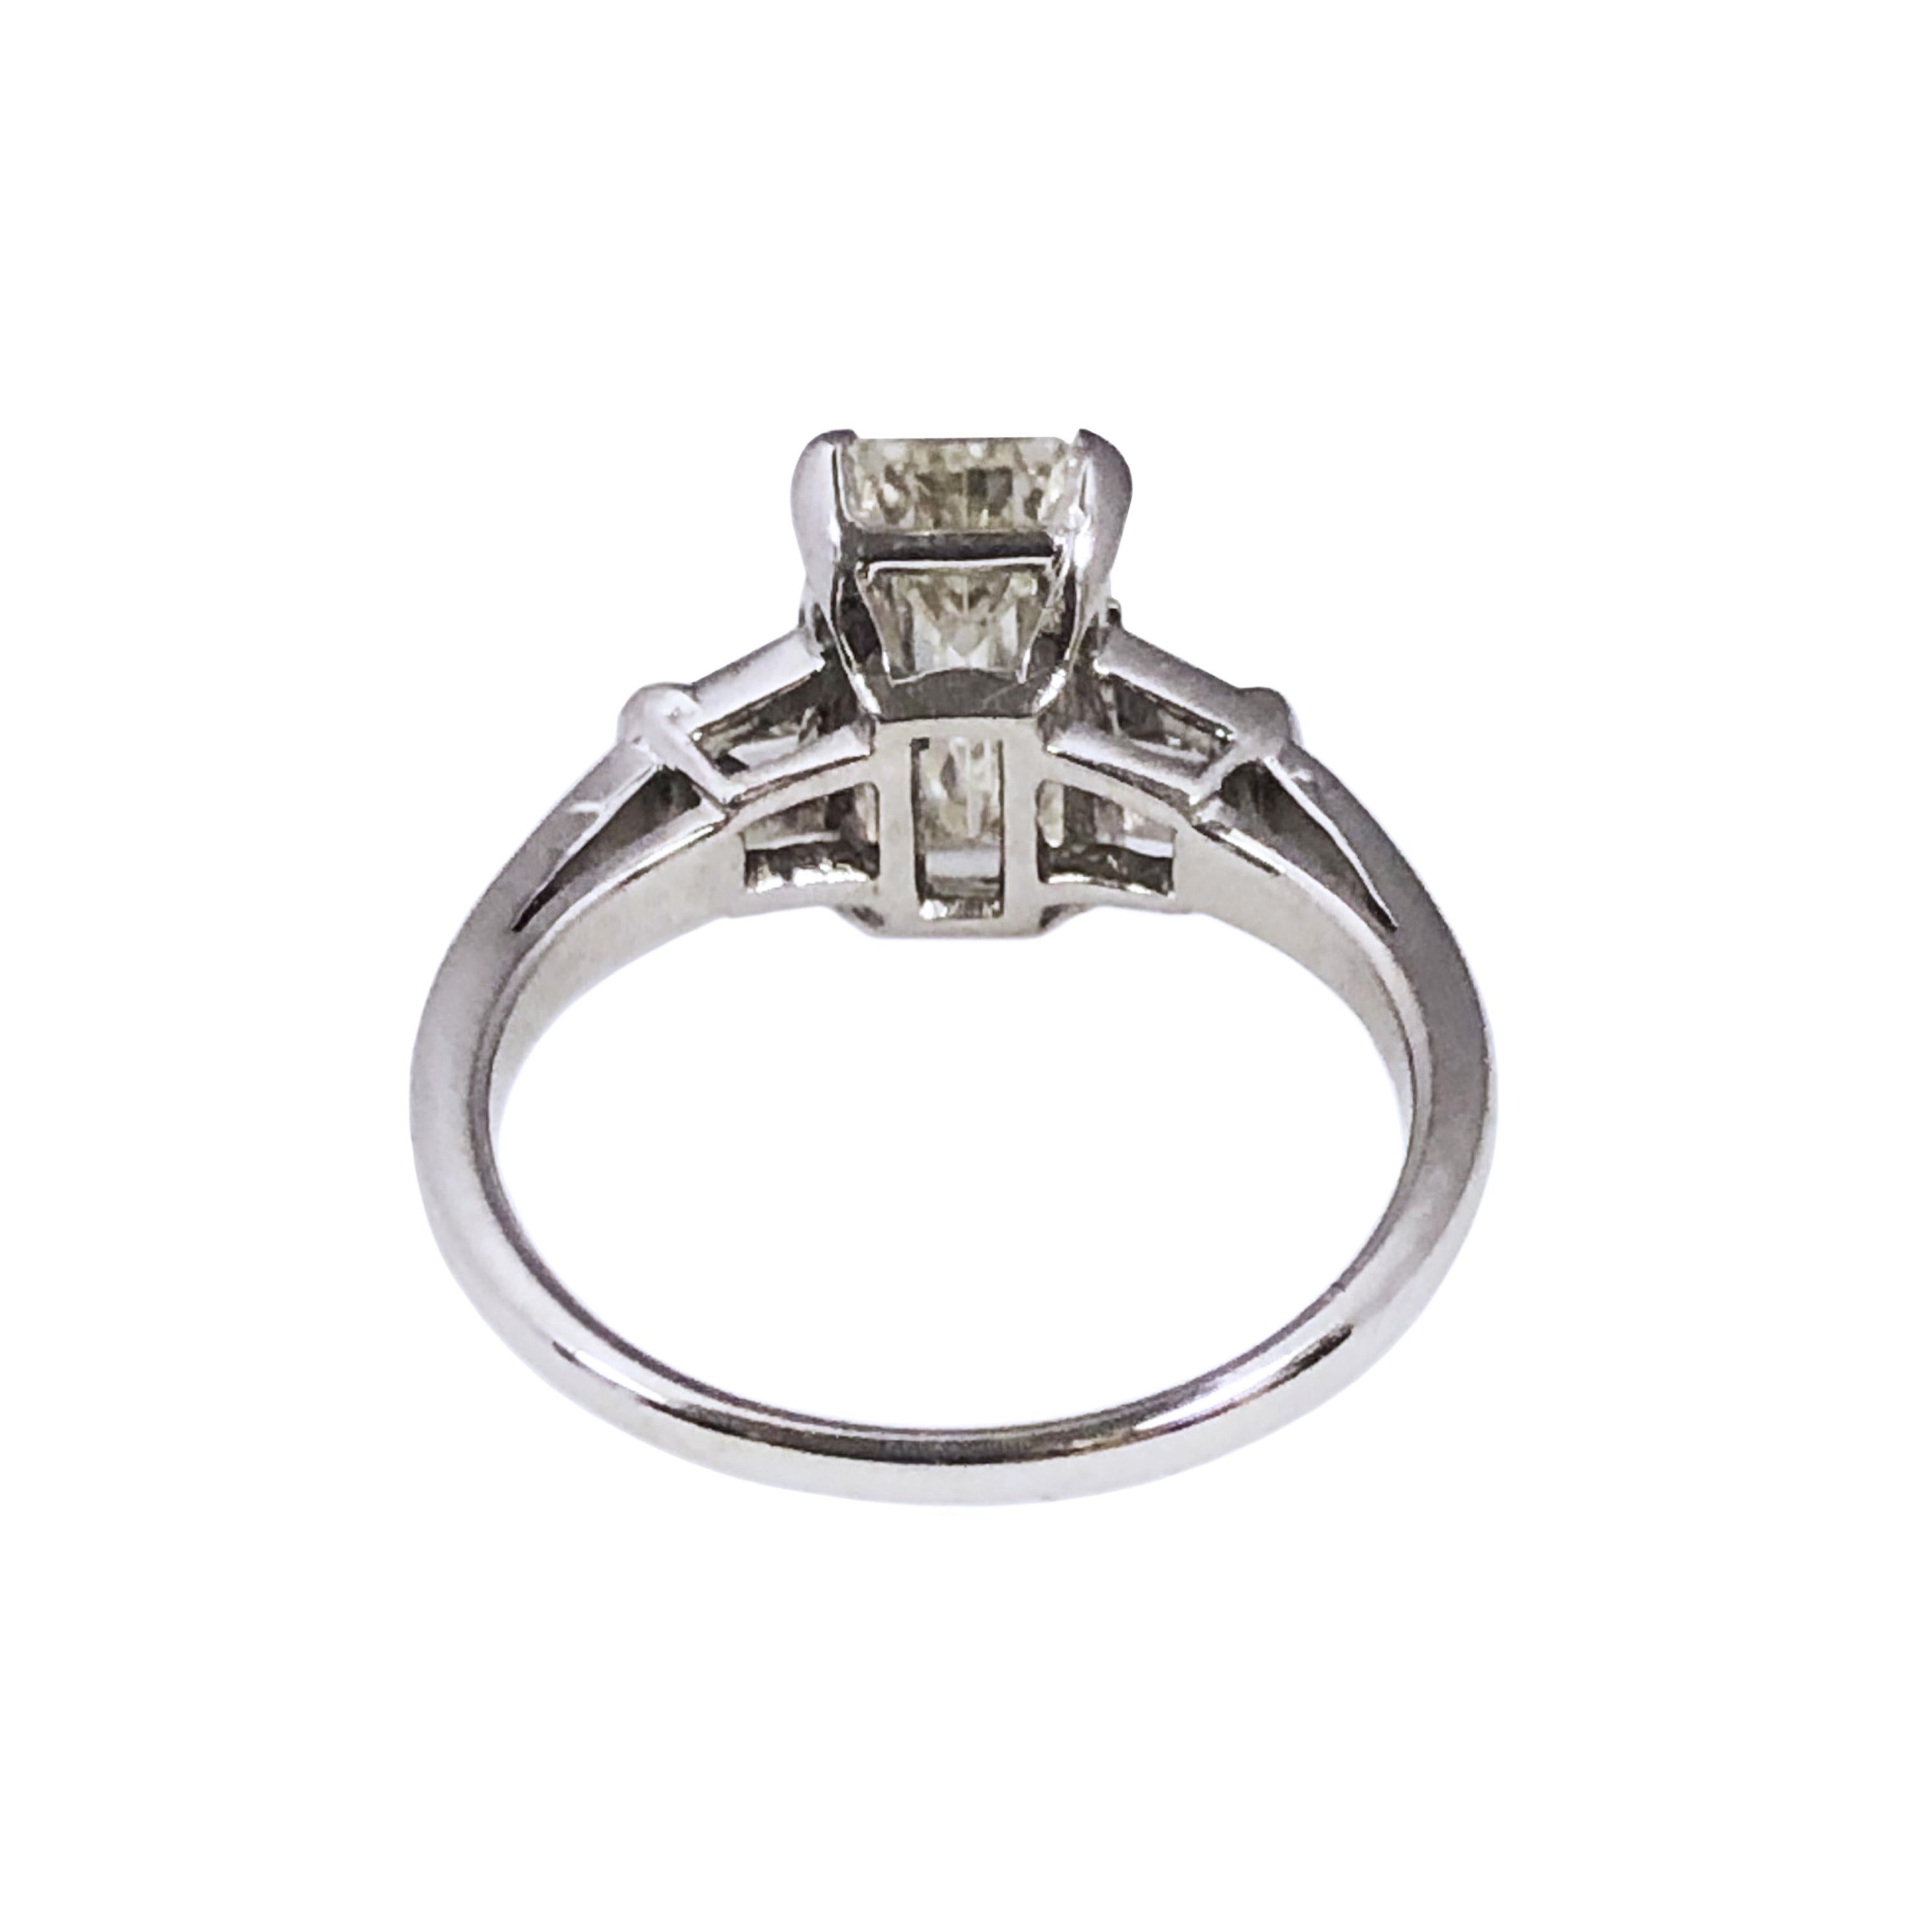 Circa 1950 Platinum and Diamond Ring, centrally set with a 2.07 Carat Elongated Step cut, Emerald cut Diamond Grading as L in Color ( Faces up much whiter ) and SI1 in clarity, Set on either side with Tapered Baguette Diamonds. Finger size 5 3/4.